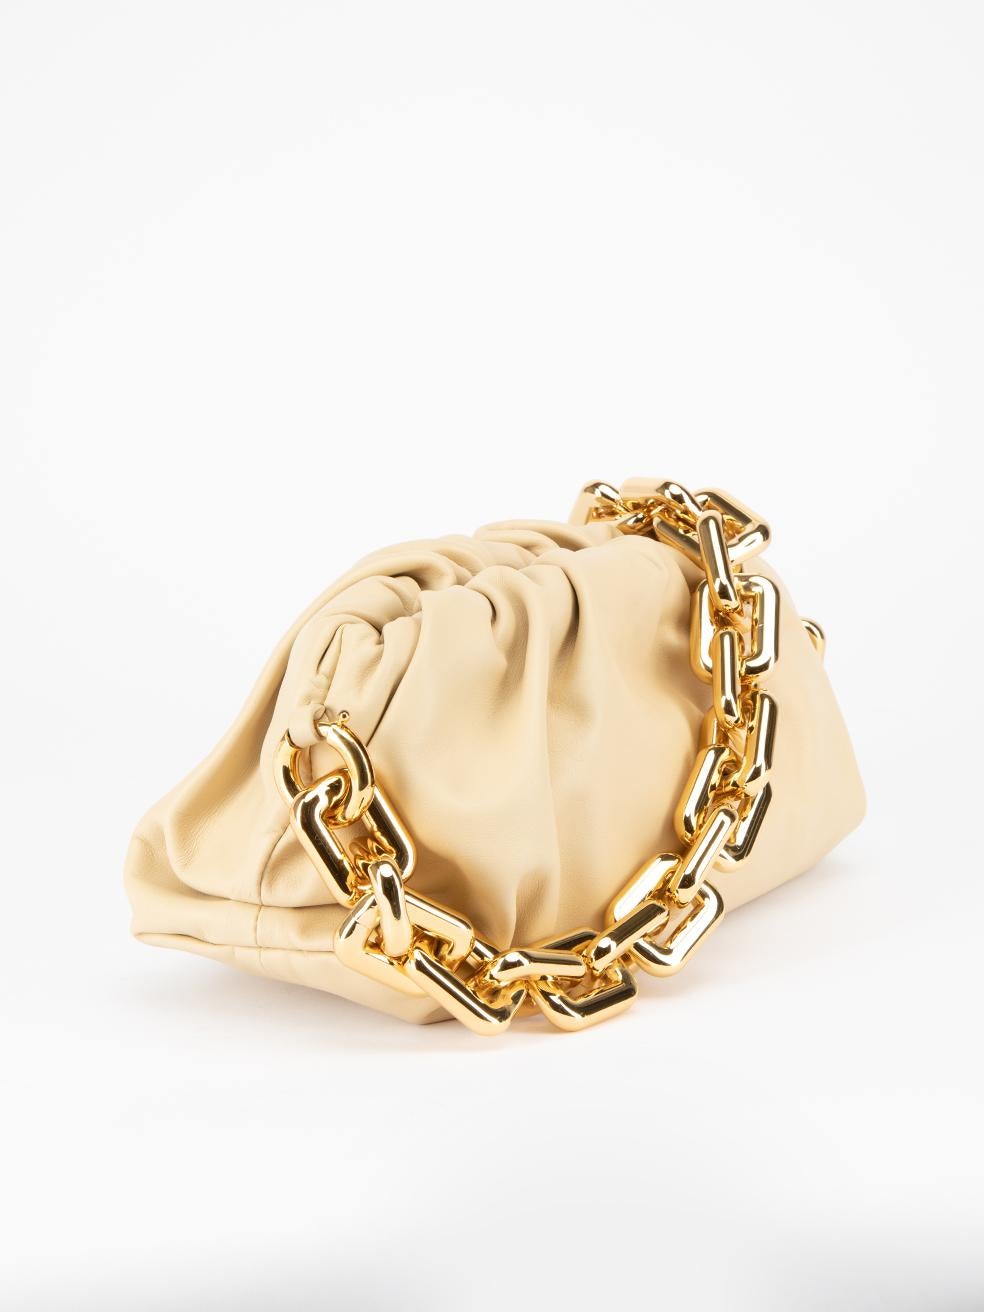 CONDITION is Very good. Minimal wear to bag is evident. Very minimal wear to the gold chain strap which lightly scuffed and thee is a small pink stain at the opening of the bag on this used Bottega Veneta designer resale item. This item comes with